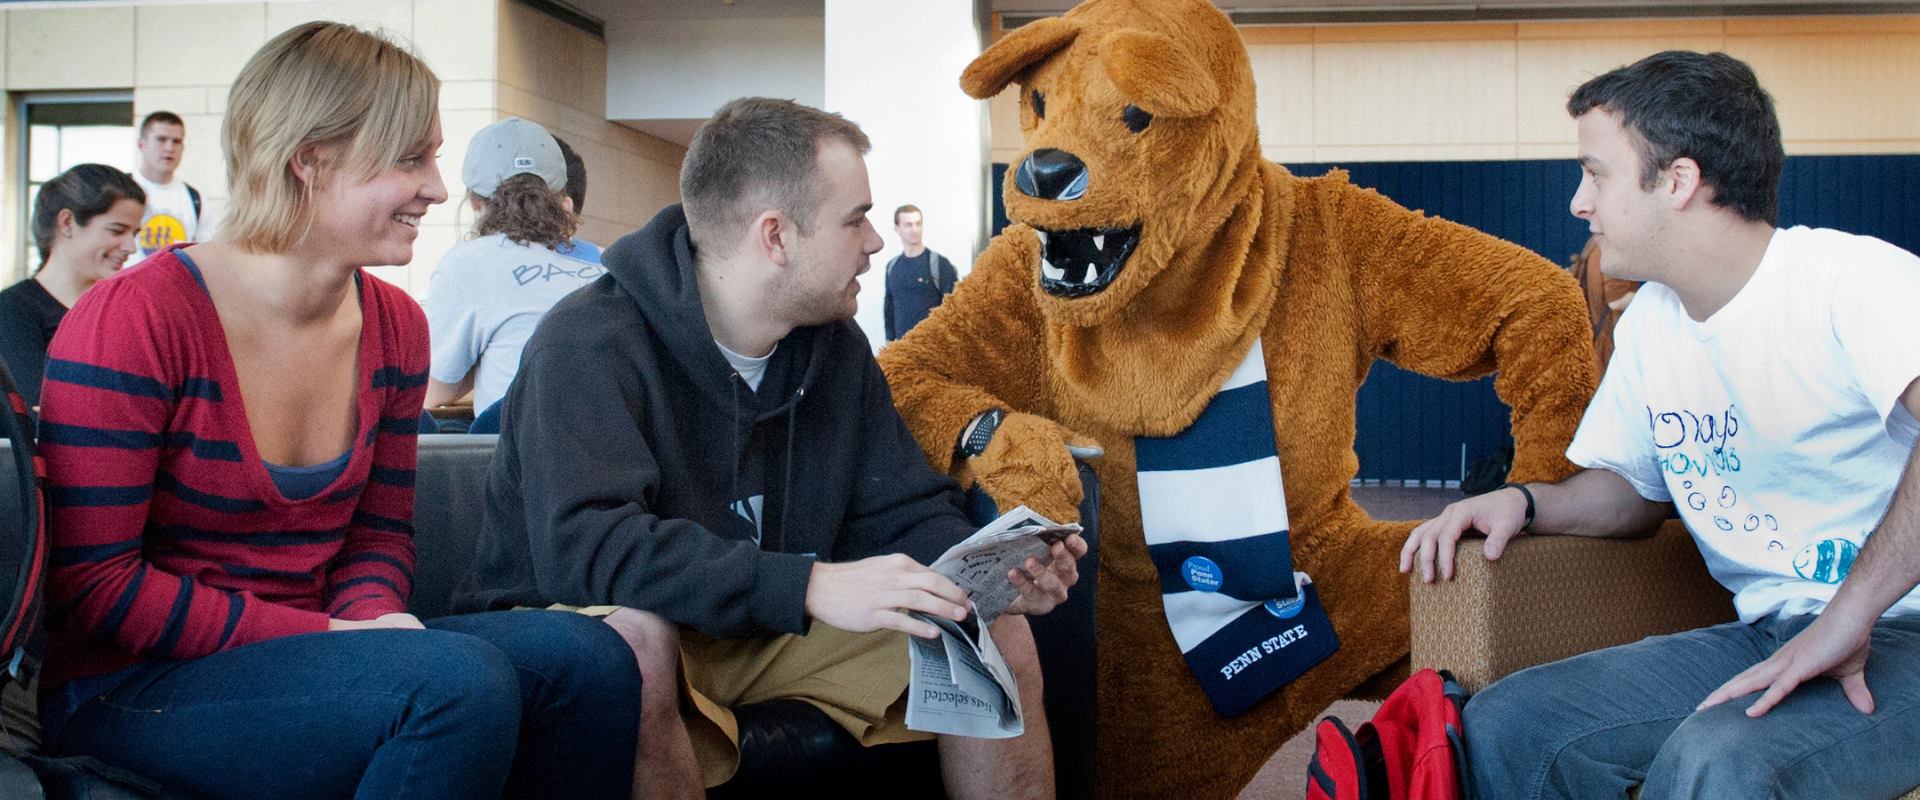 students sitting in chairs talking to each other and Nittany Lion Mascot